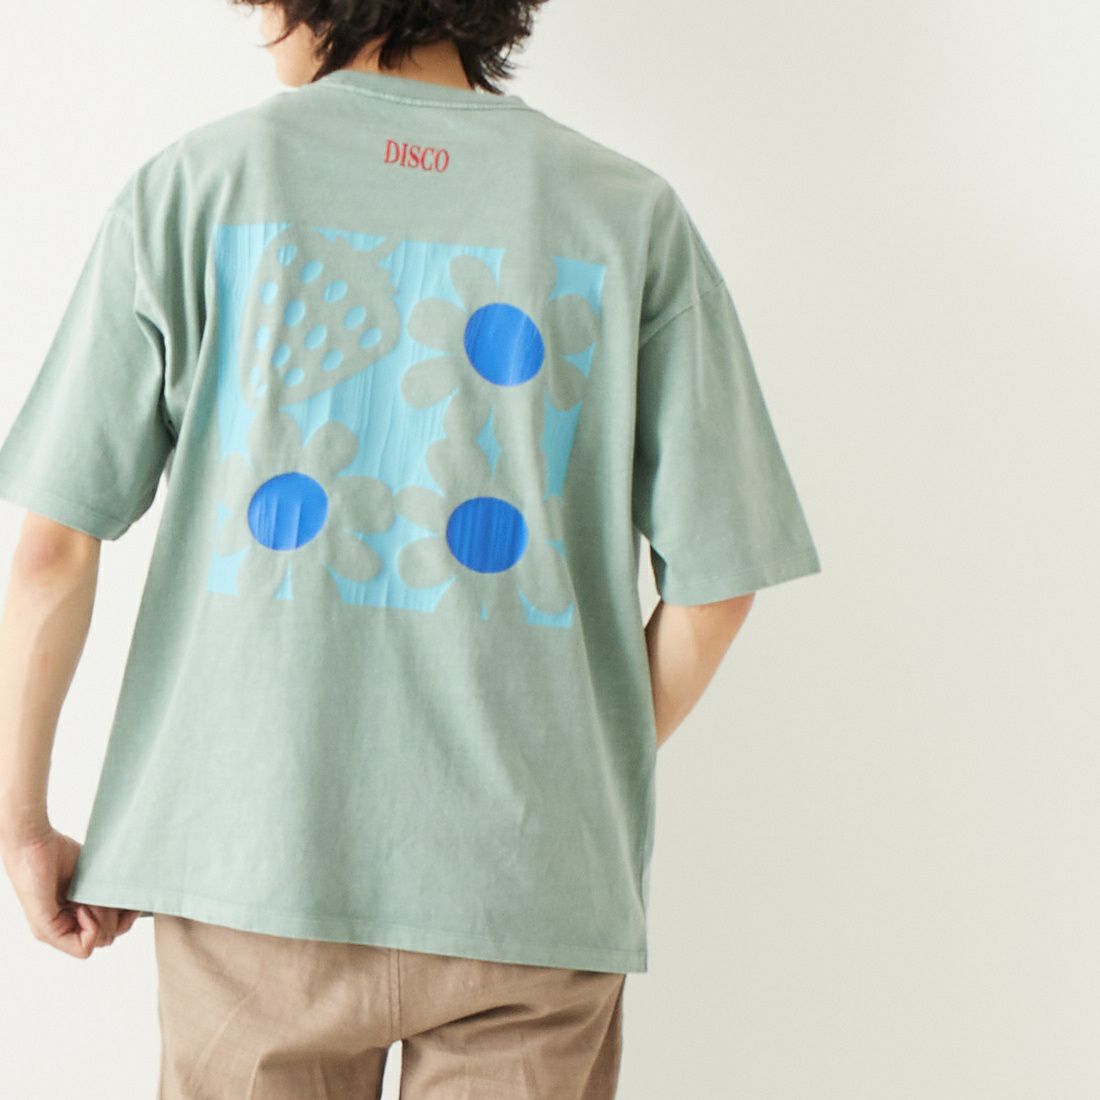 Jeans Factory Clothes [ジーンズファクトリークローズ] DISCOプリントTシャツ [2322-420IN-A] MINT &&モデル身長：182cm 着用サイズ：L&&